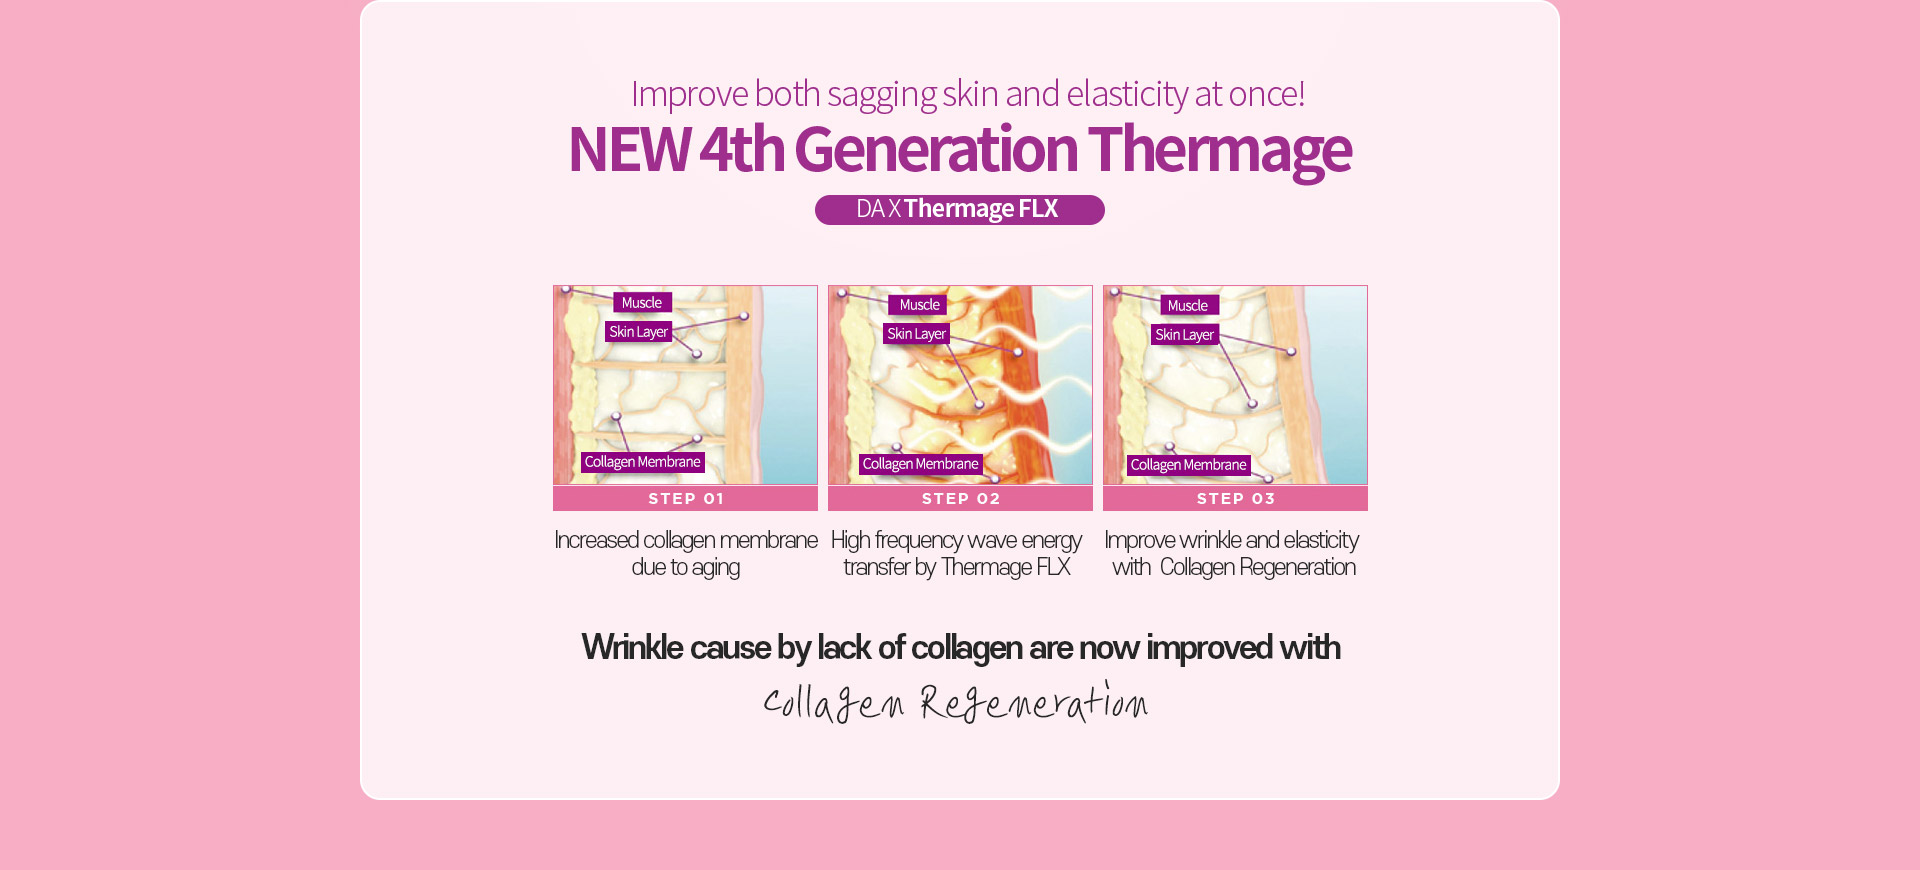 NEW 4th Generation Thermage Improve both sagging skin and elasticity at once!